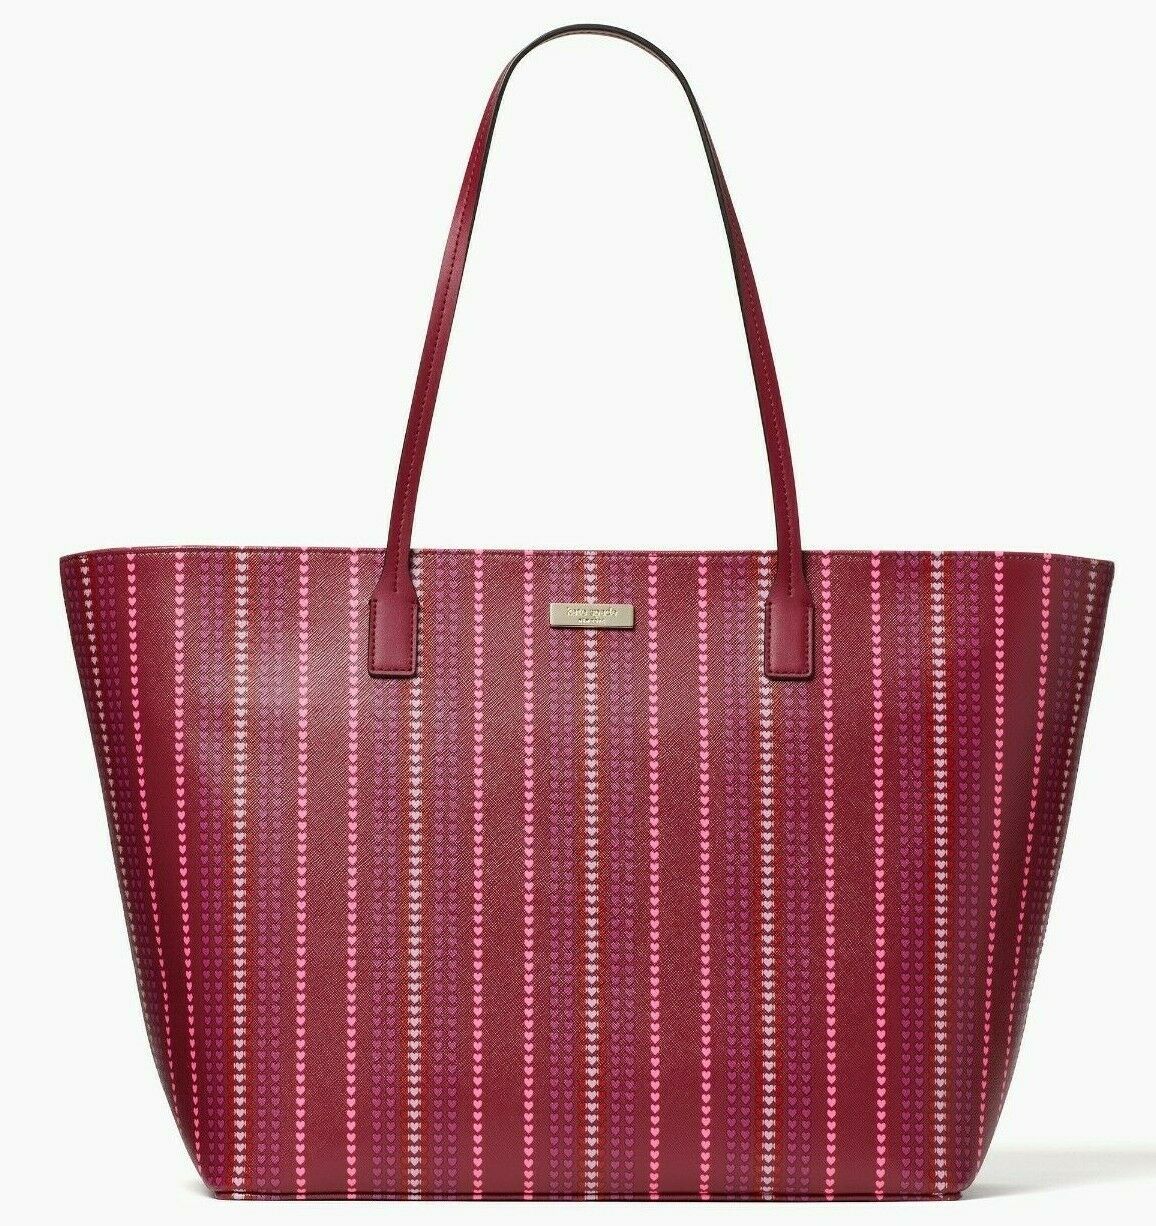 Primary image for Kate Spade Margareta Cranberry Heart Extra Large Tote WKRU6581 NWT $299 MSRP FS